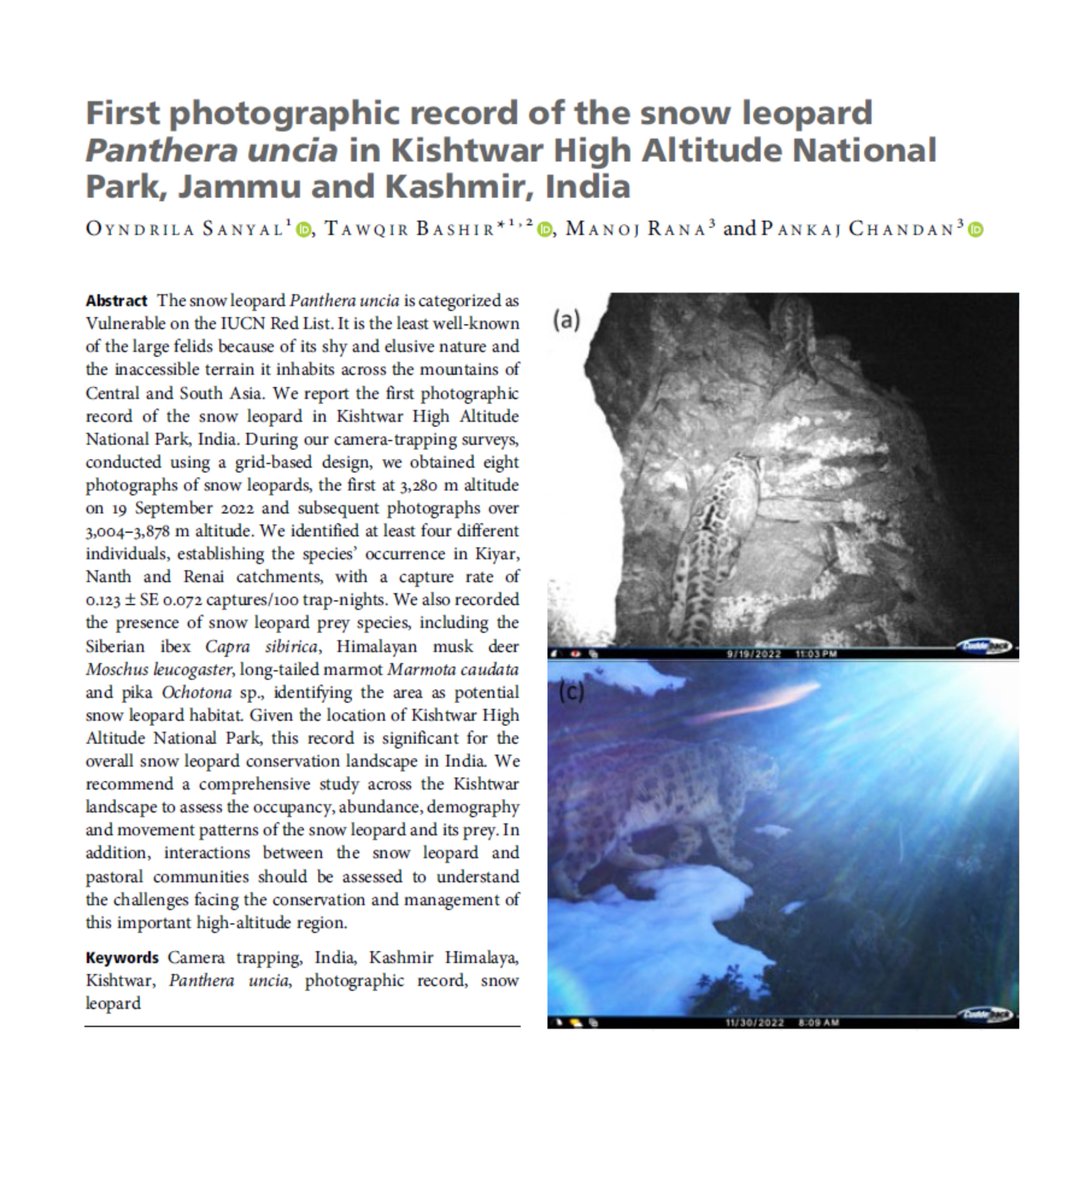 📌New #SLResearch paper alert! 1st📷records of #snowleopards in India's Kishtwar High Altitude National Park. At least four🐆 individuals were identified in camera trap images, indicating potential snow leopard habitat! 📎doi.org/mvnp #snowleopardconservation